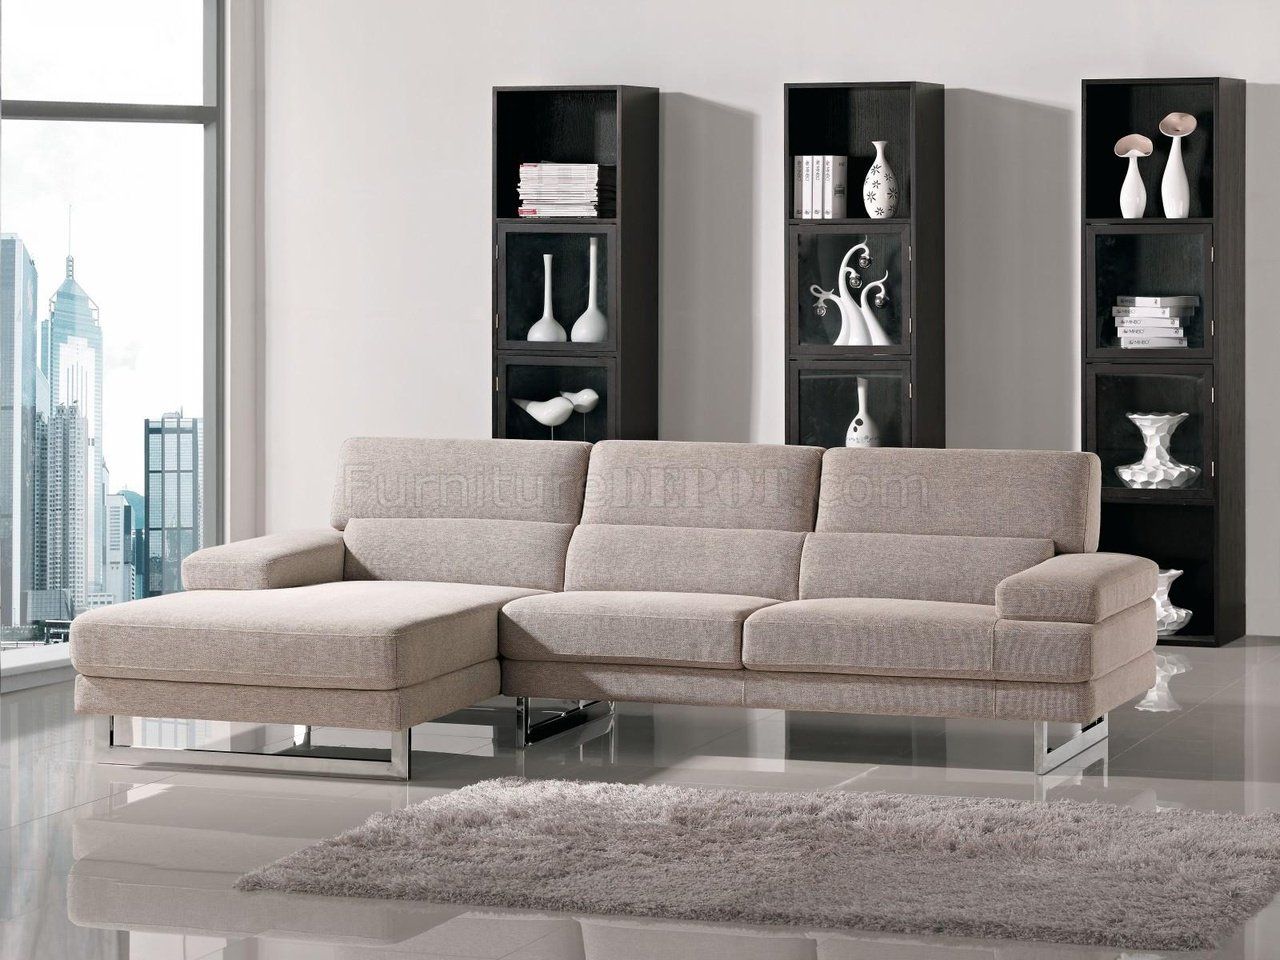 Beige Fabric L Shape Modern Sectional Sofa W/metal Legs With Small L Shaped Sectional Sofas In Beige (Gallery 3 of 21)